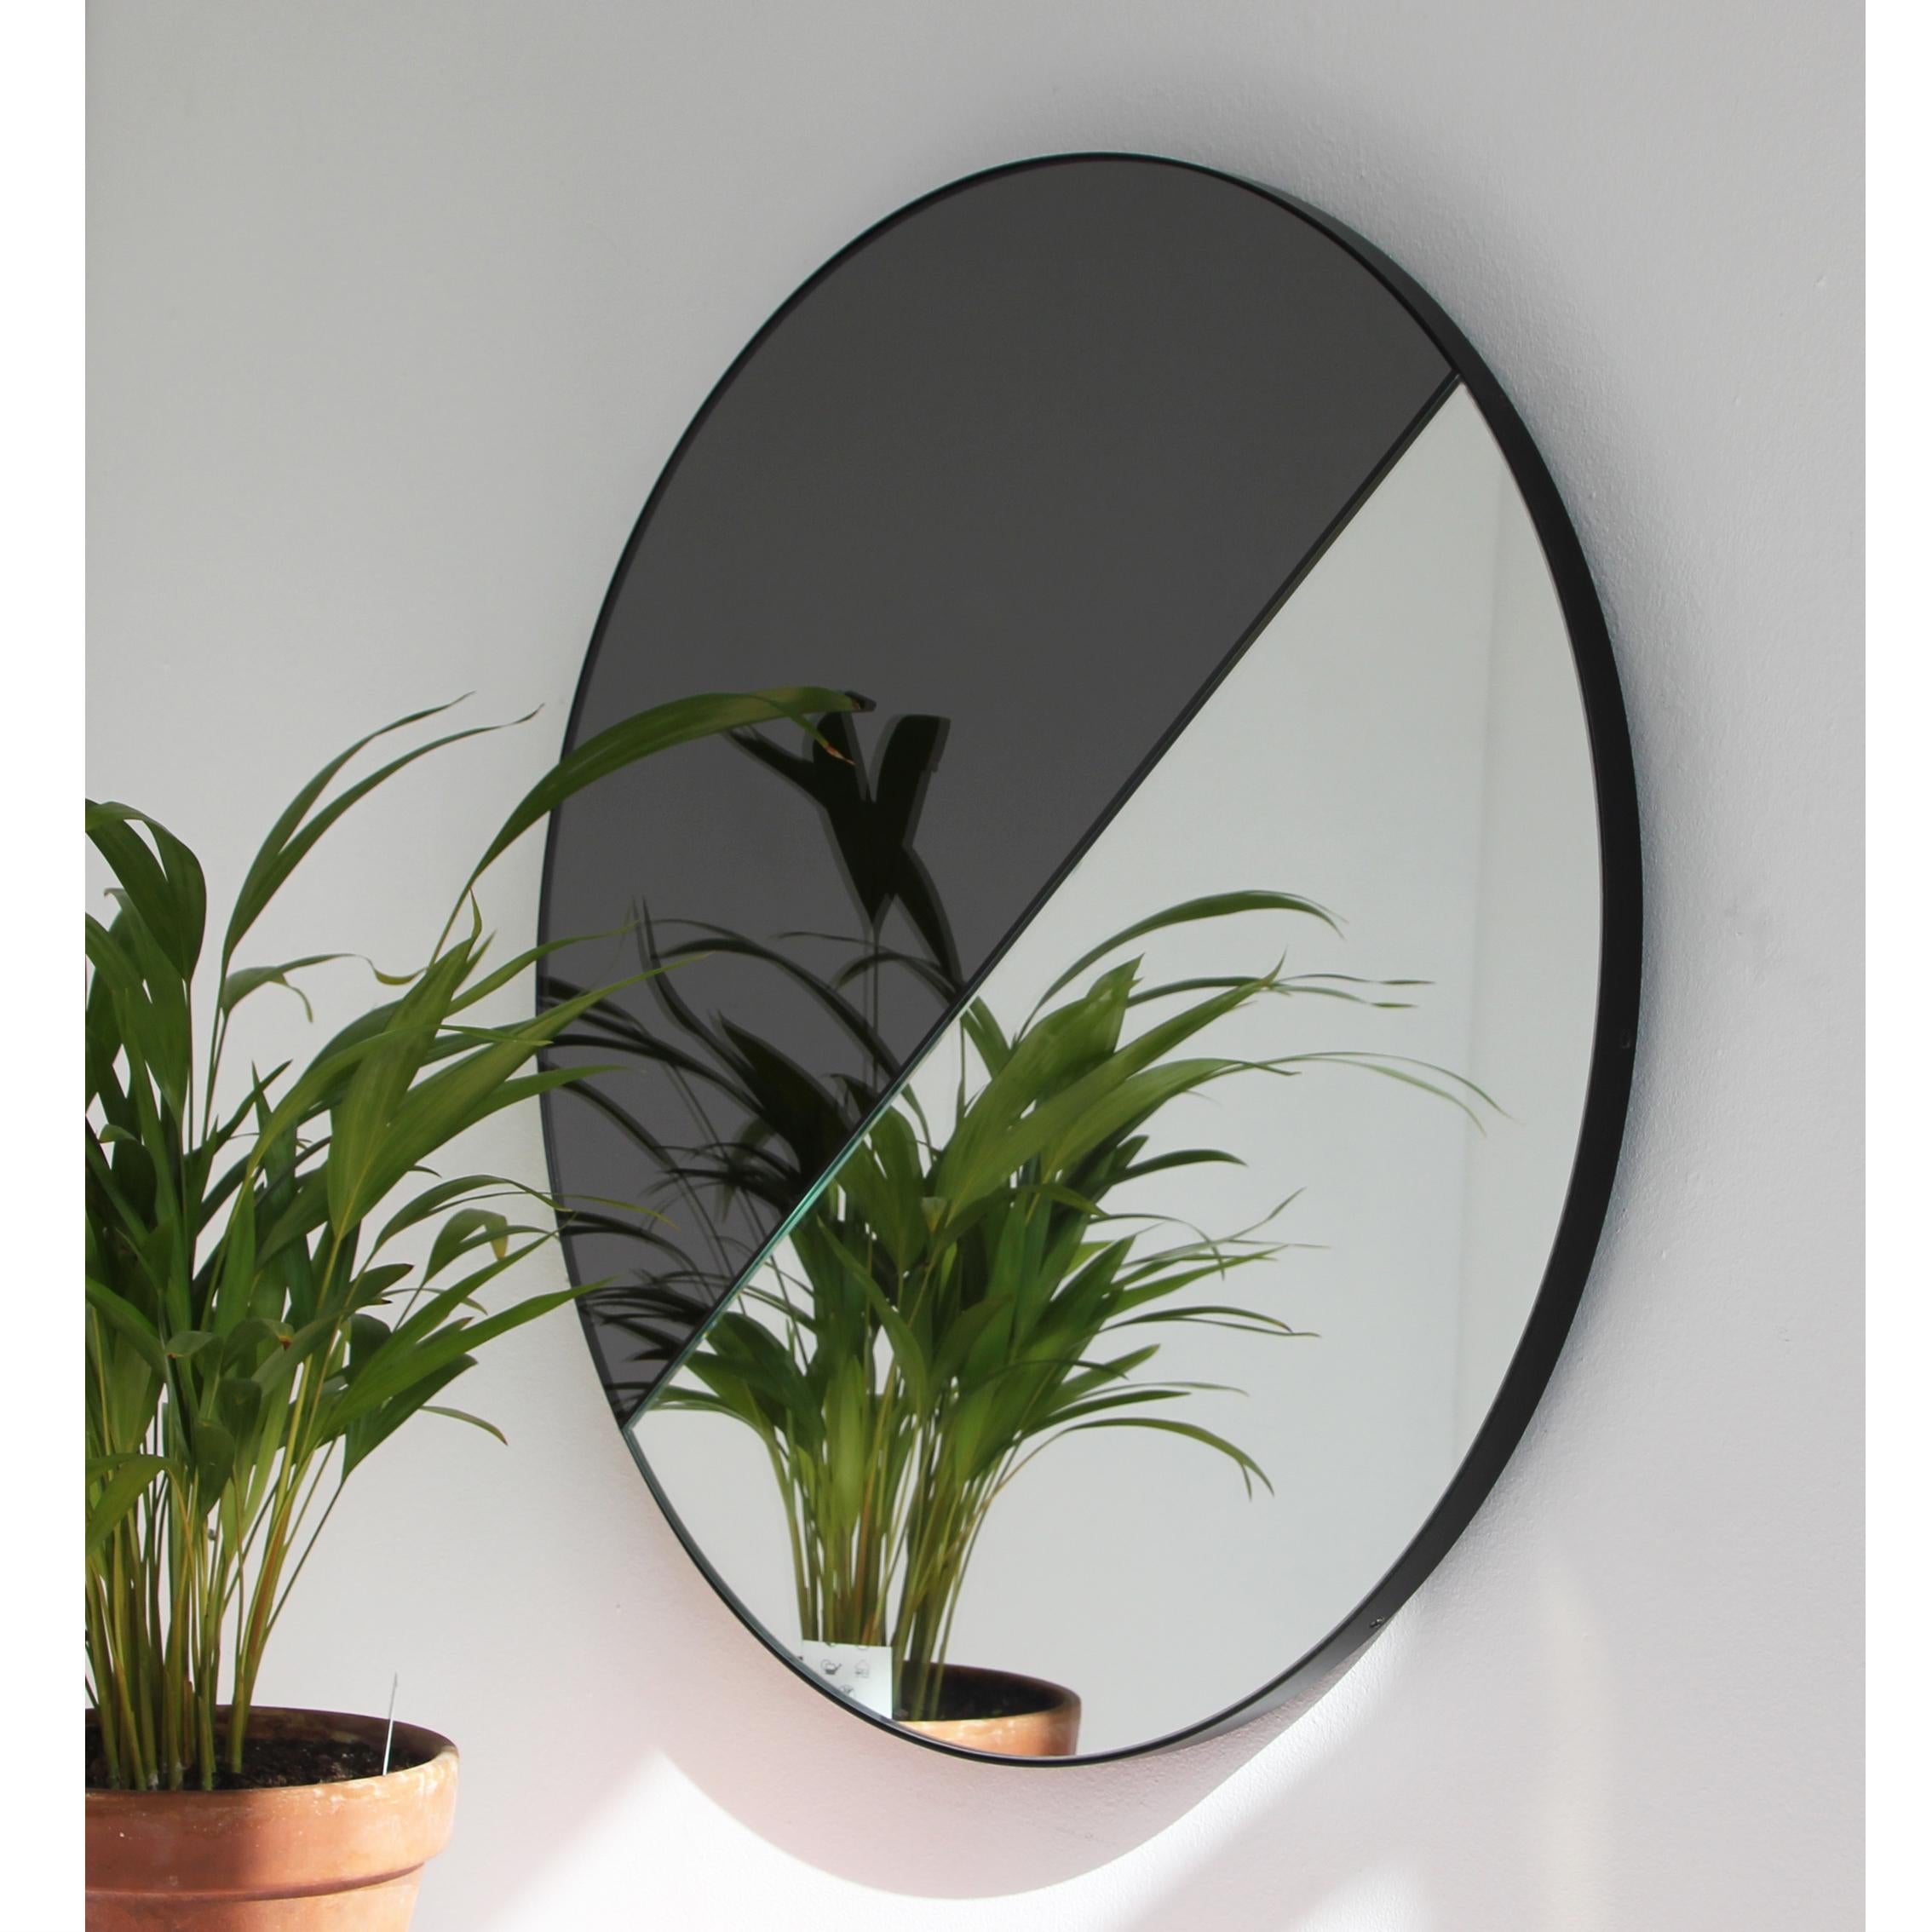 Powder-Coated Orbis Dualis Mixed Tint Contemporary Round Mirror with Black Frame, Large For Sale